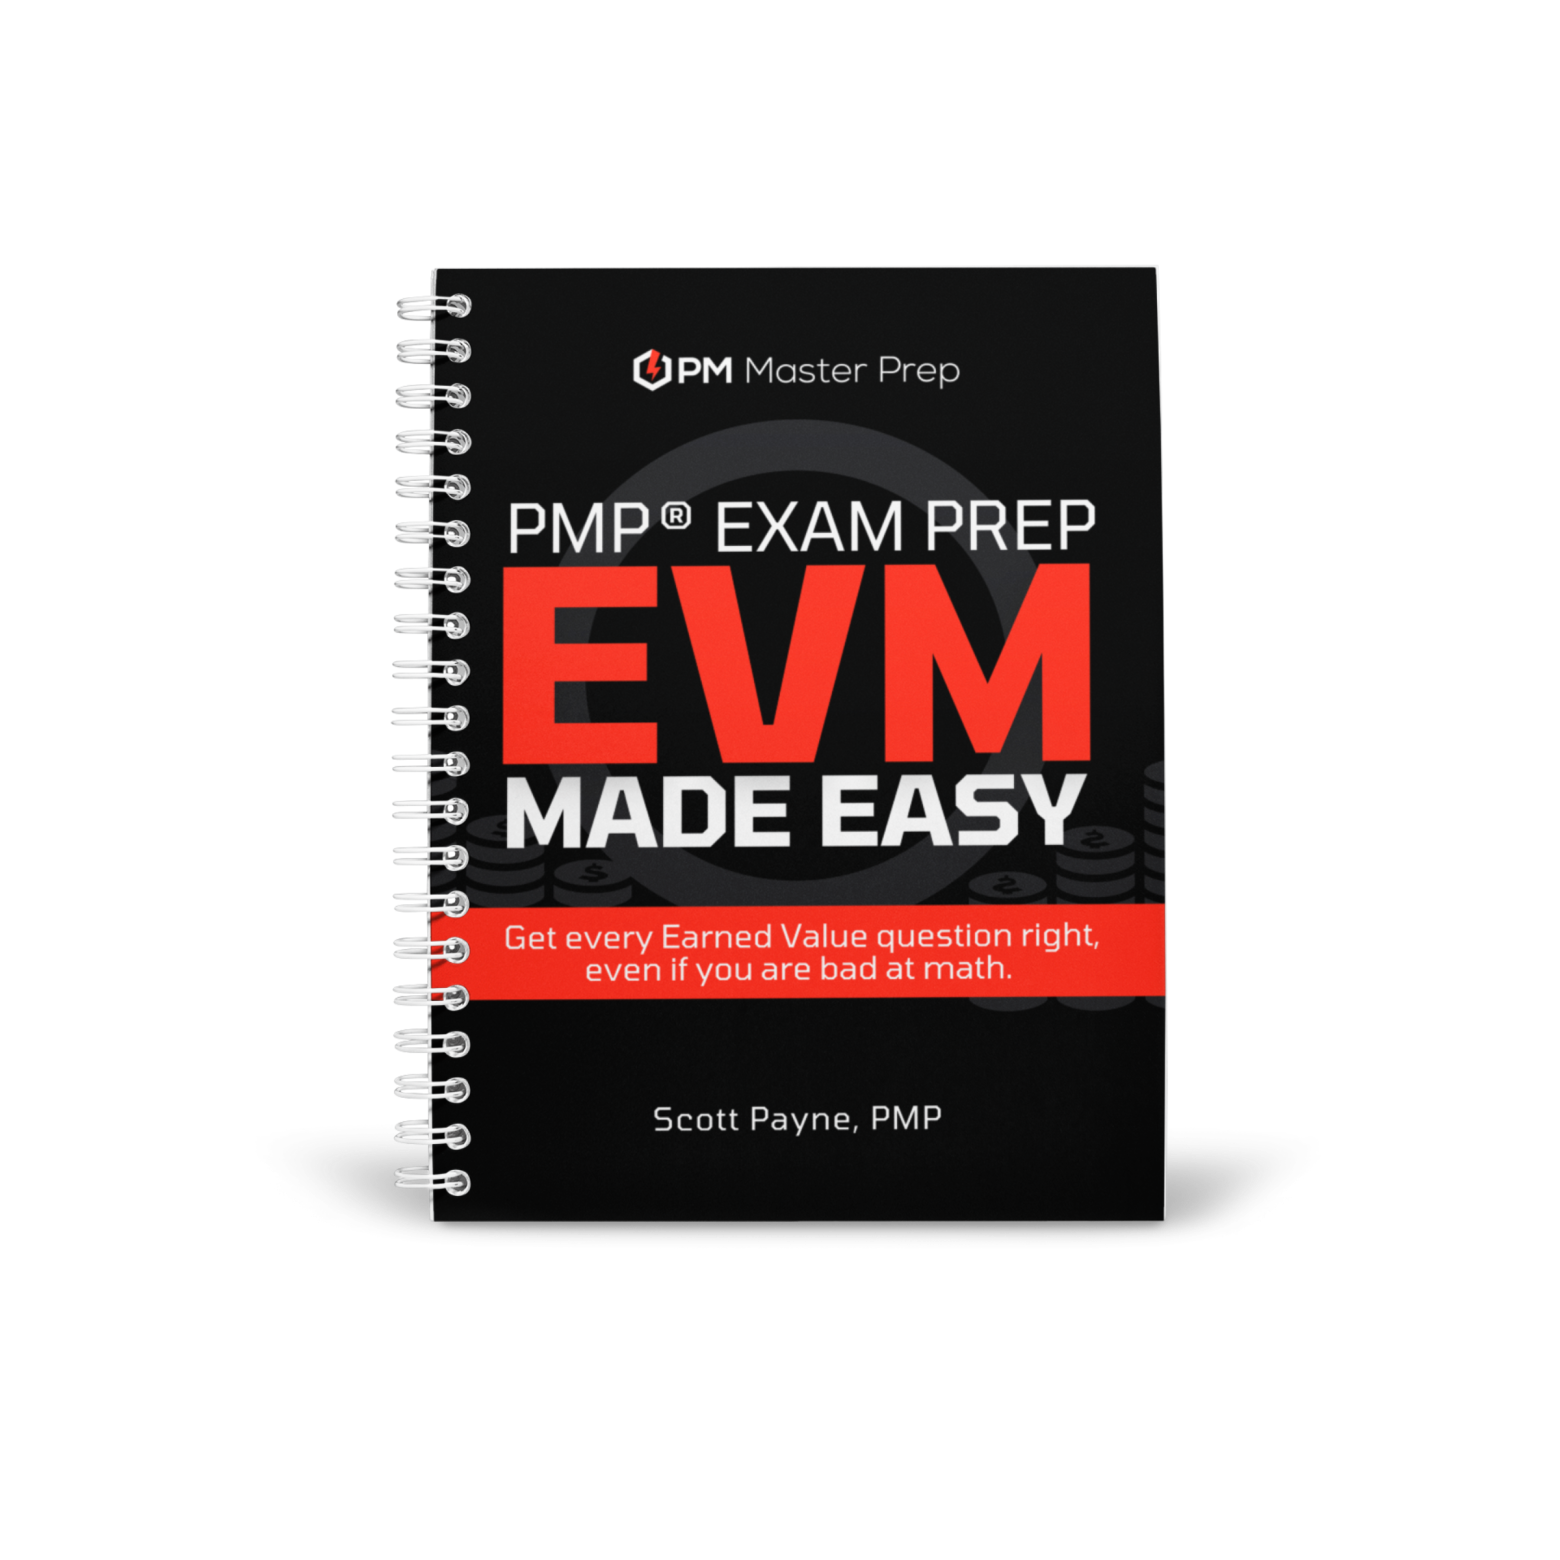 EVM Made Easy by PM Master Prep